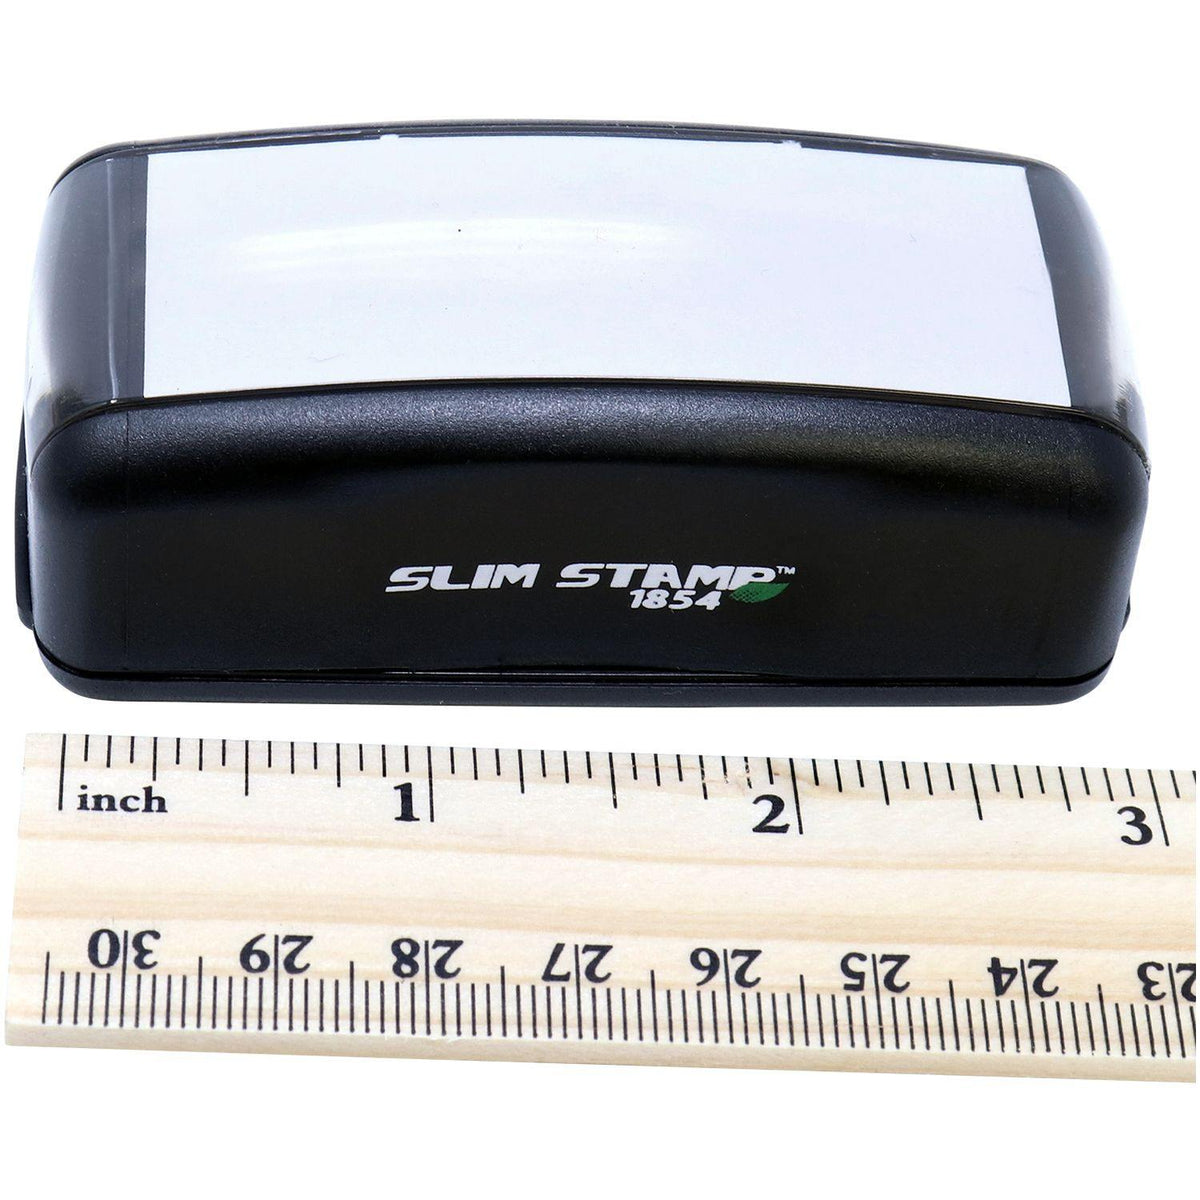 Measurement Large Pre Inked Hmo Ppo Stamp with Ruler